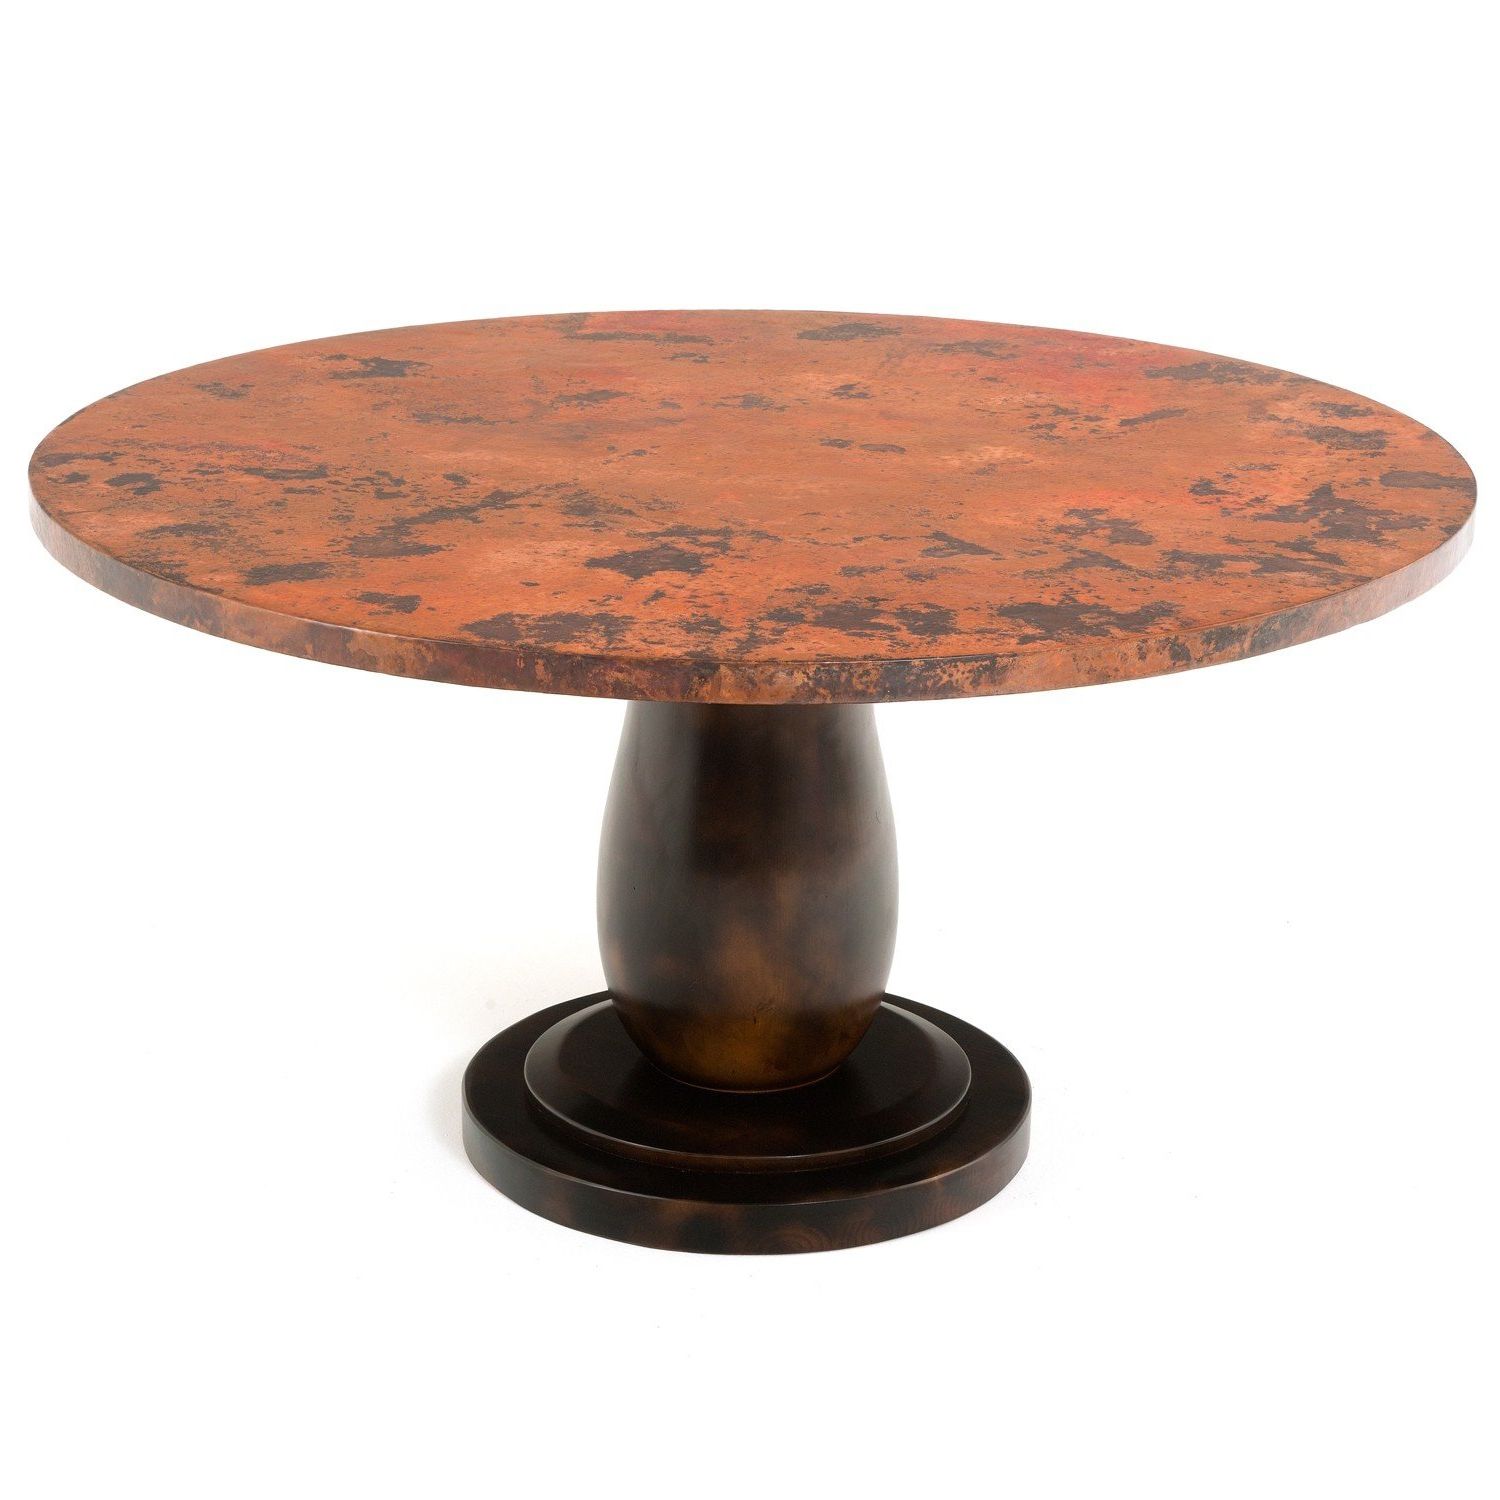 47'' Pedestal Dining Tables Inside Latest Hand Hammered Copper Pedestal Base Dining Table (View 8 of 20)